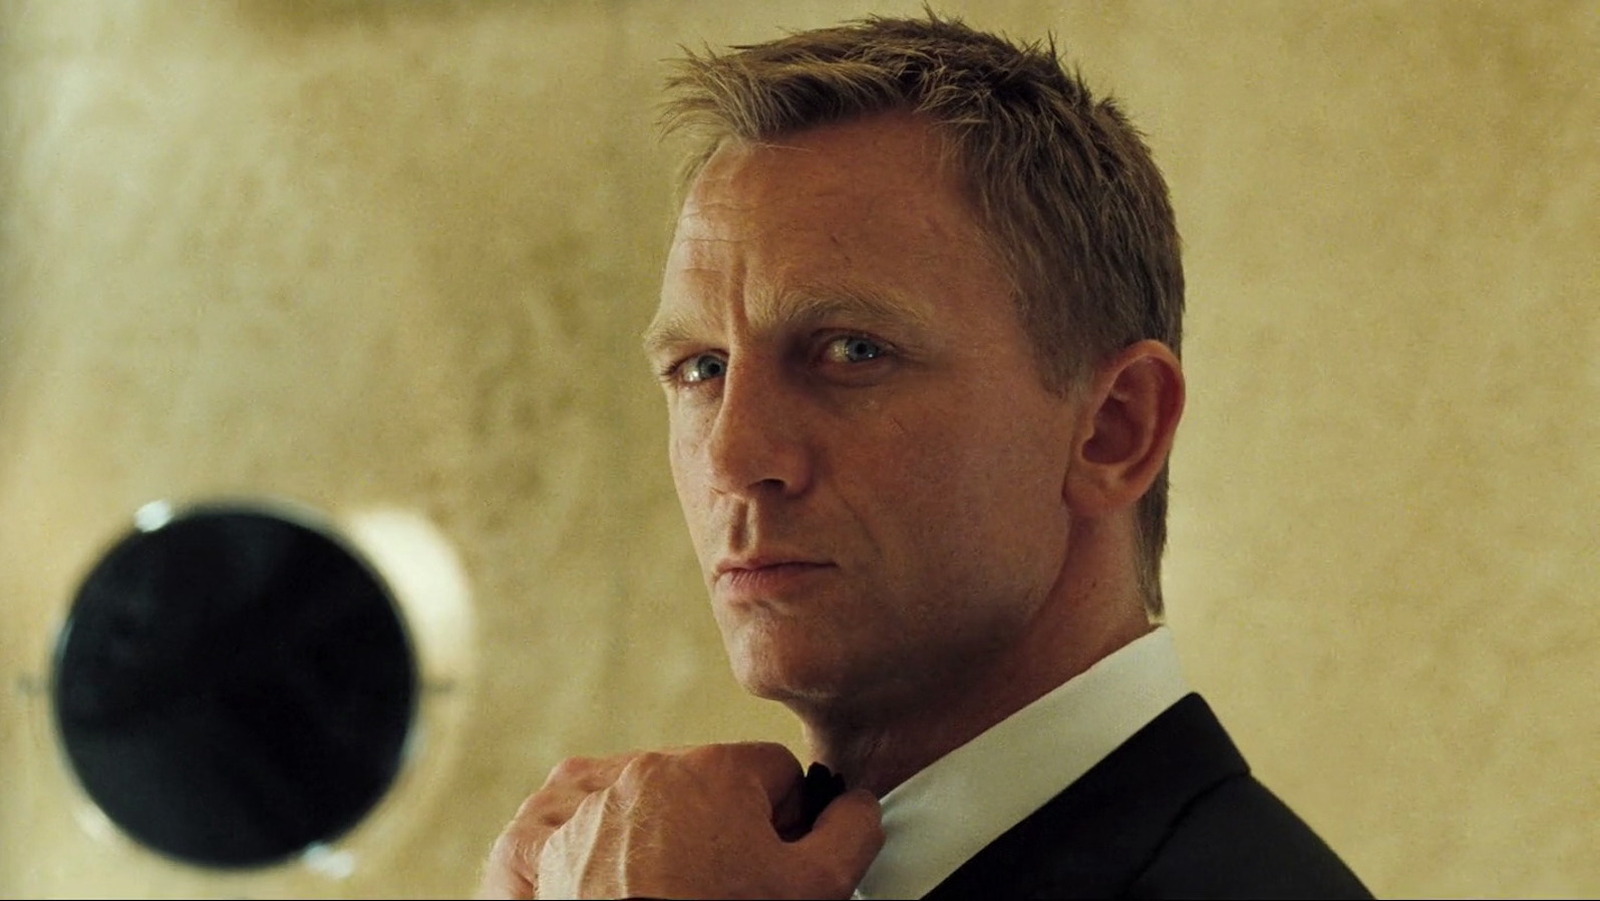 Here's when you can watch all the James Bond movies on Prime Video